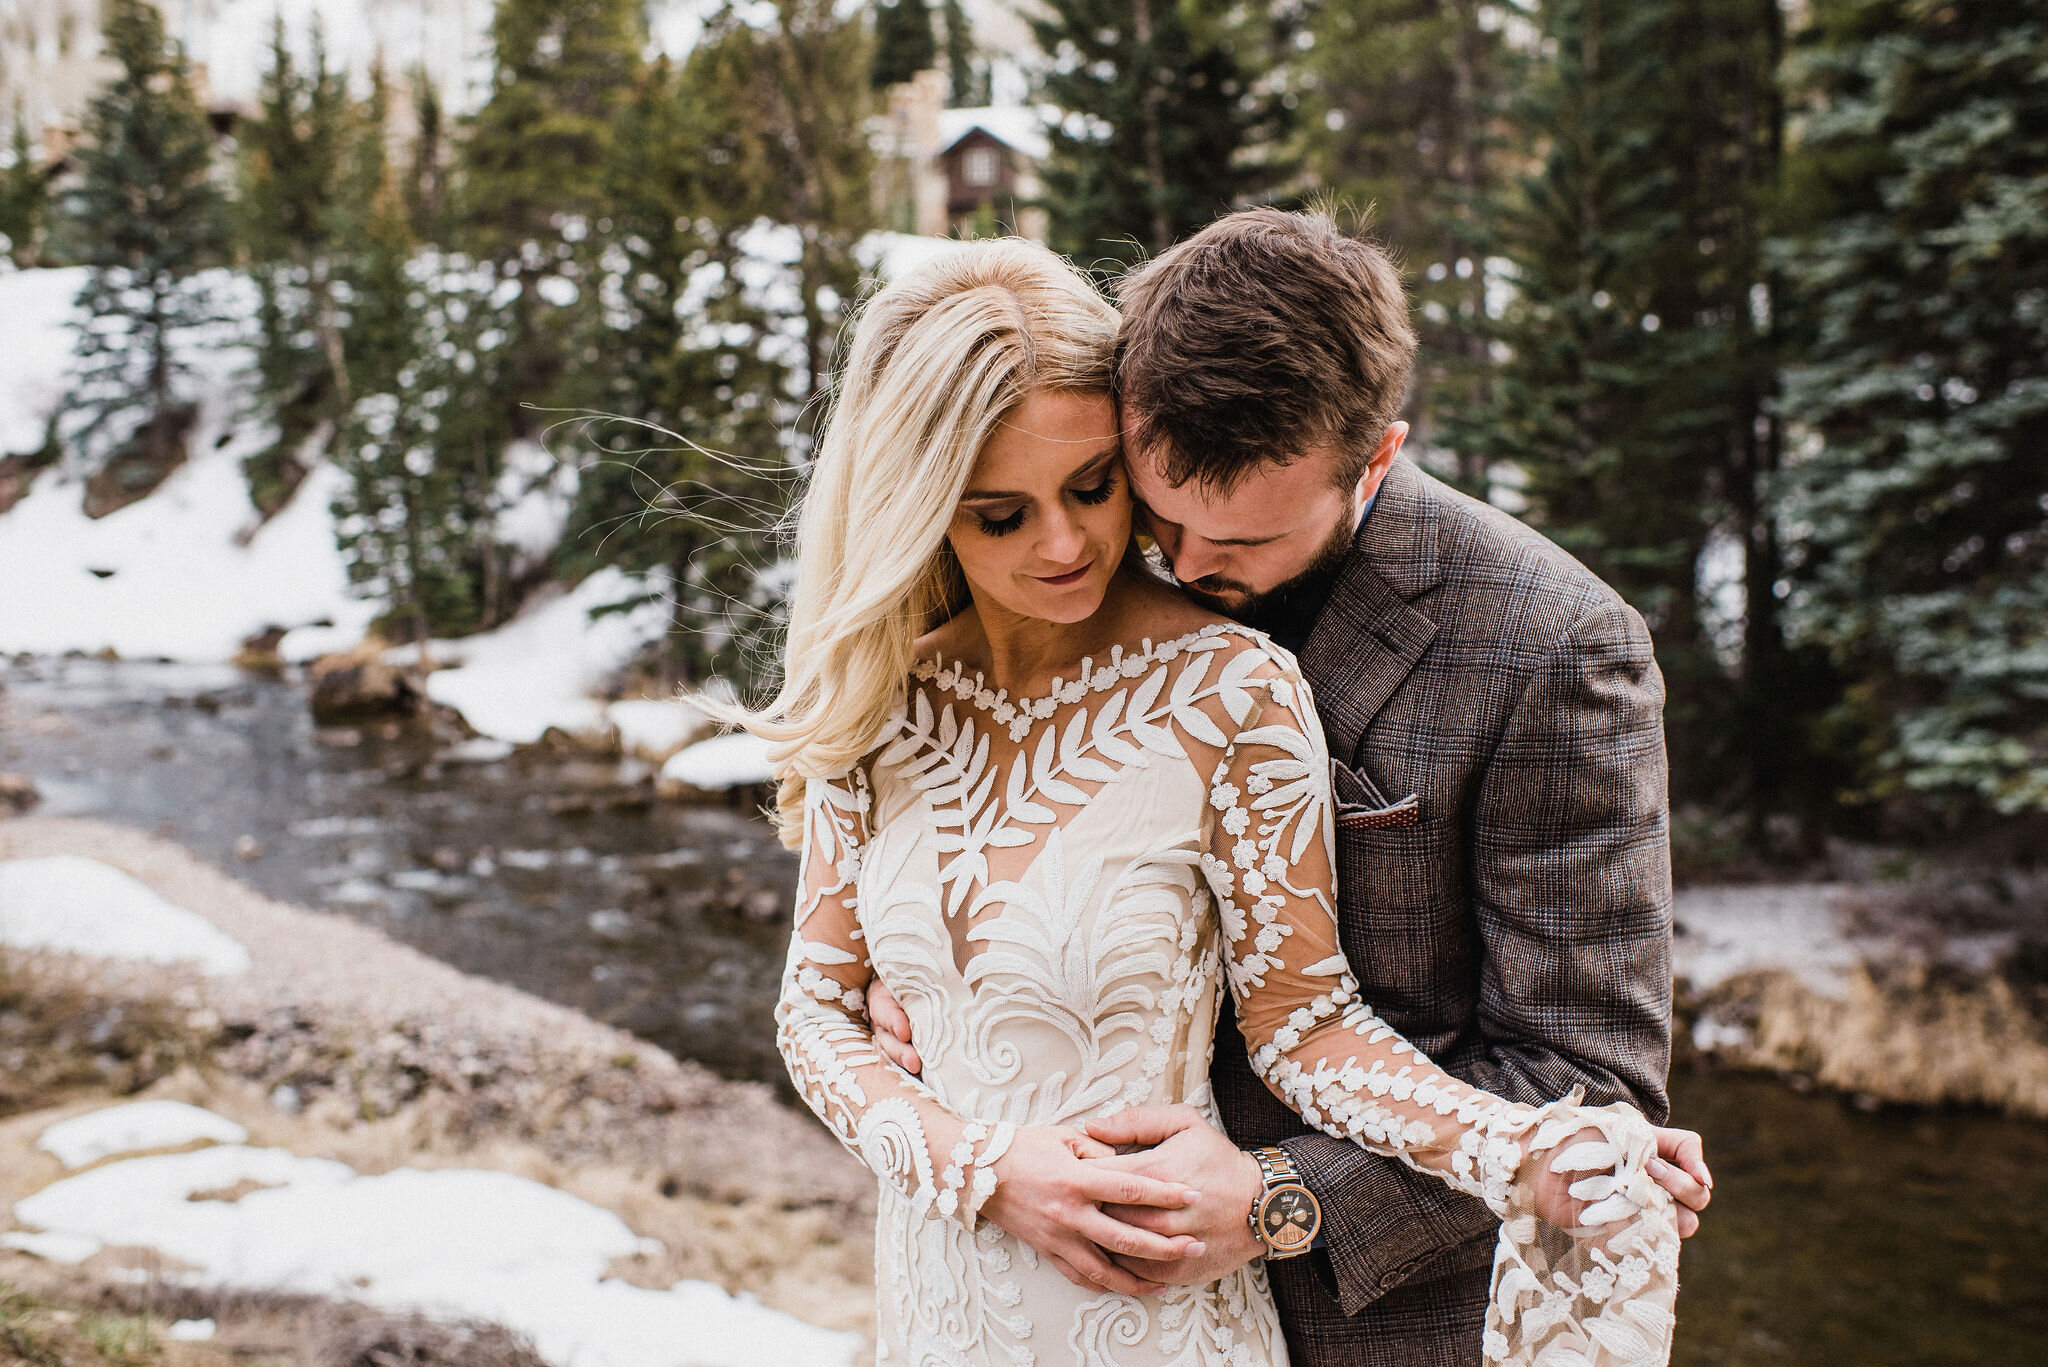 The Arrabelle at Vail Wedding Planner